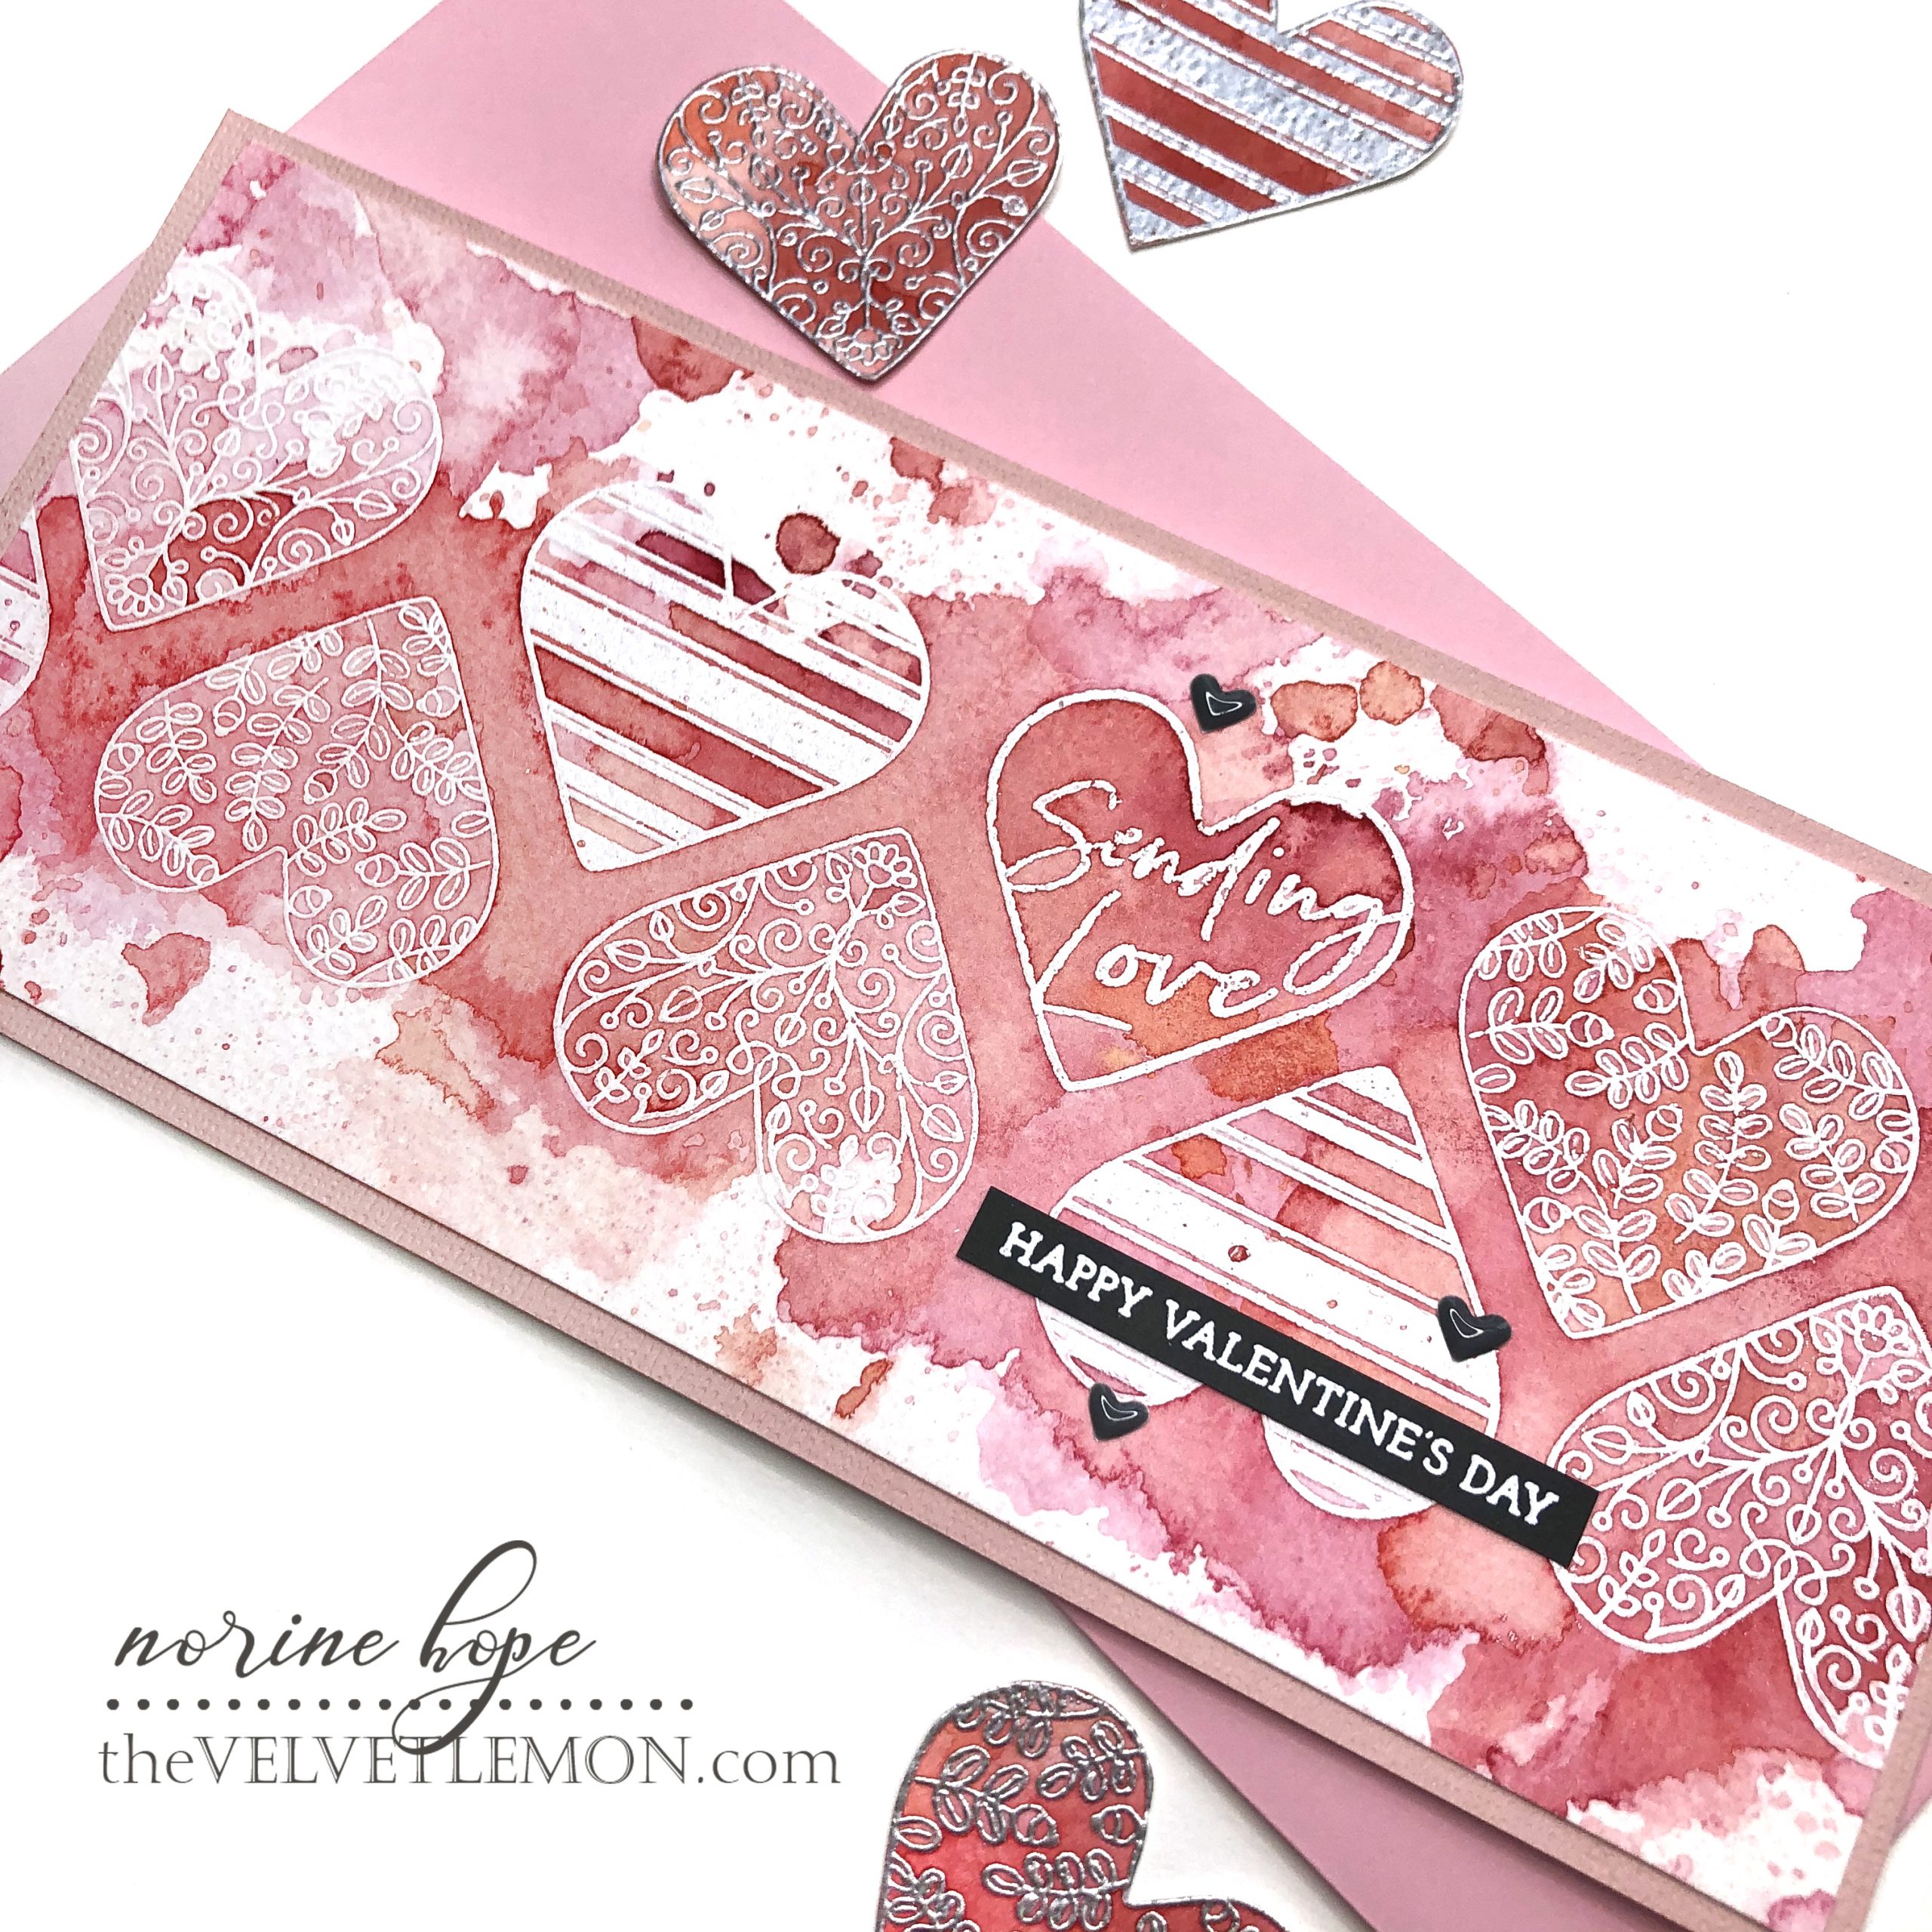 Valentine's Day Card with Spellbinders [Clear Stamp of the Month!] 